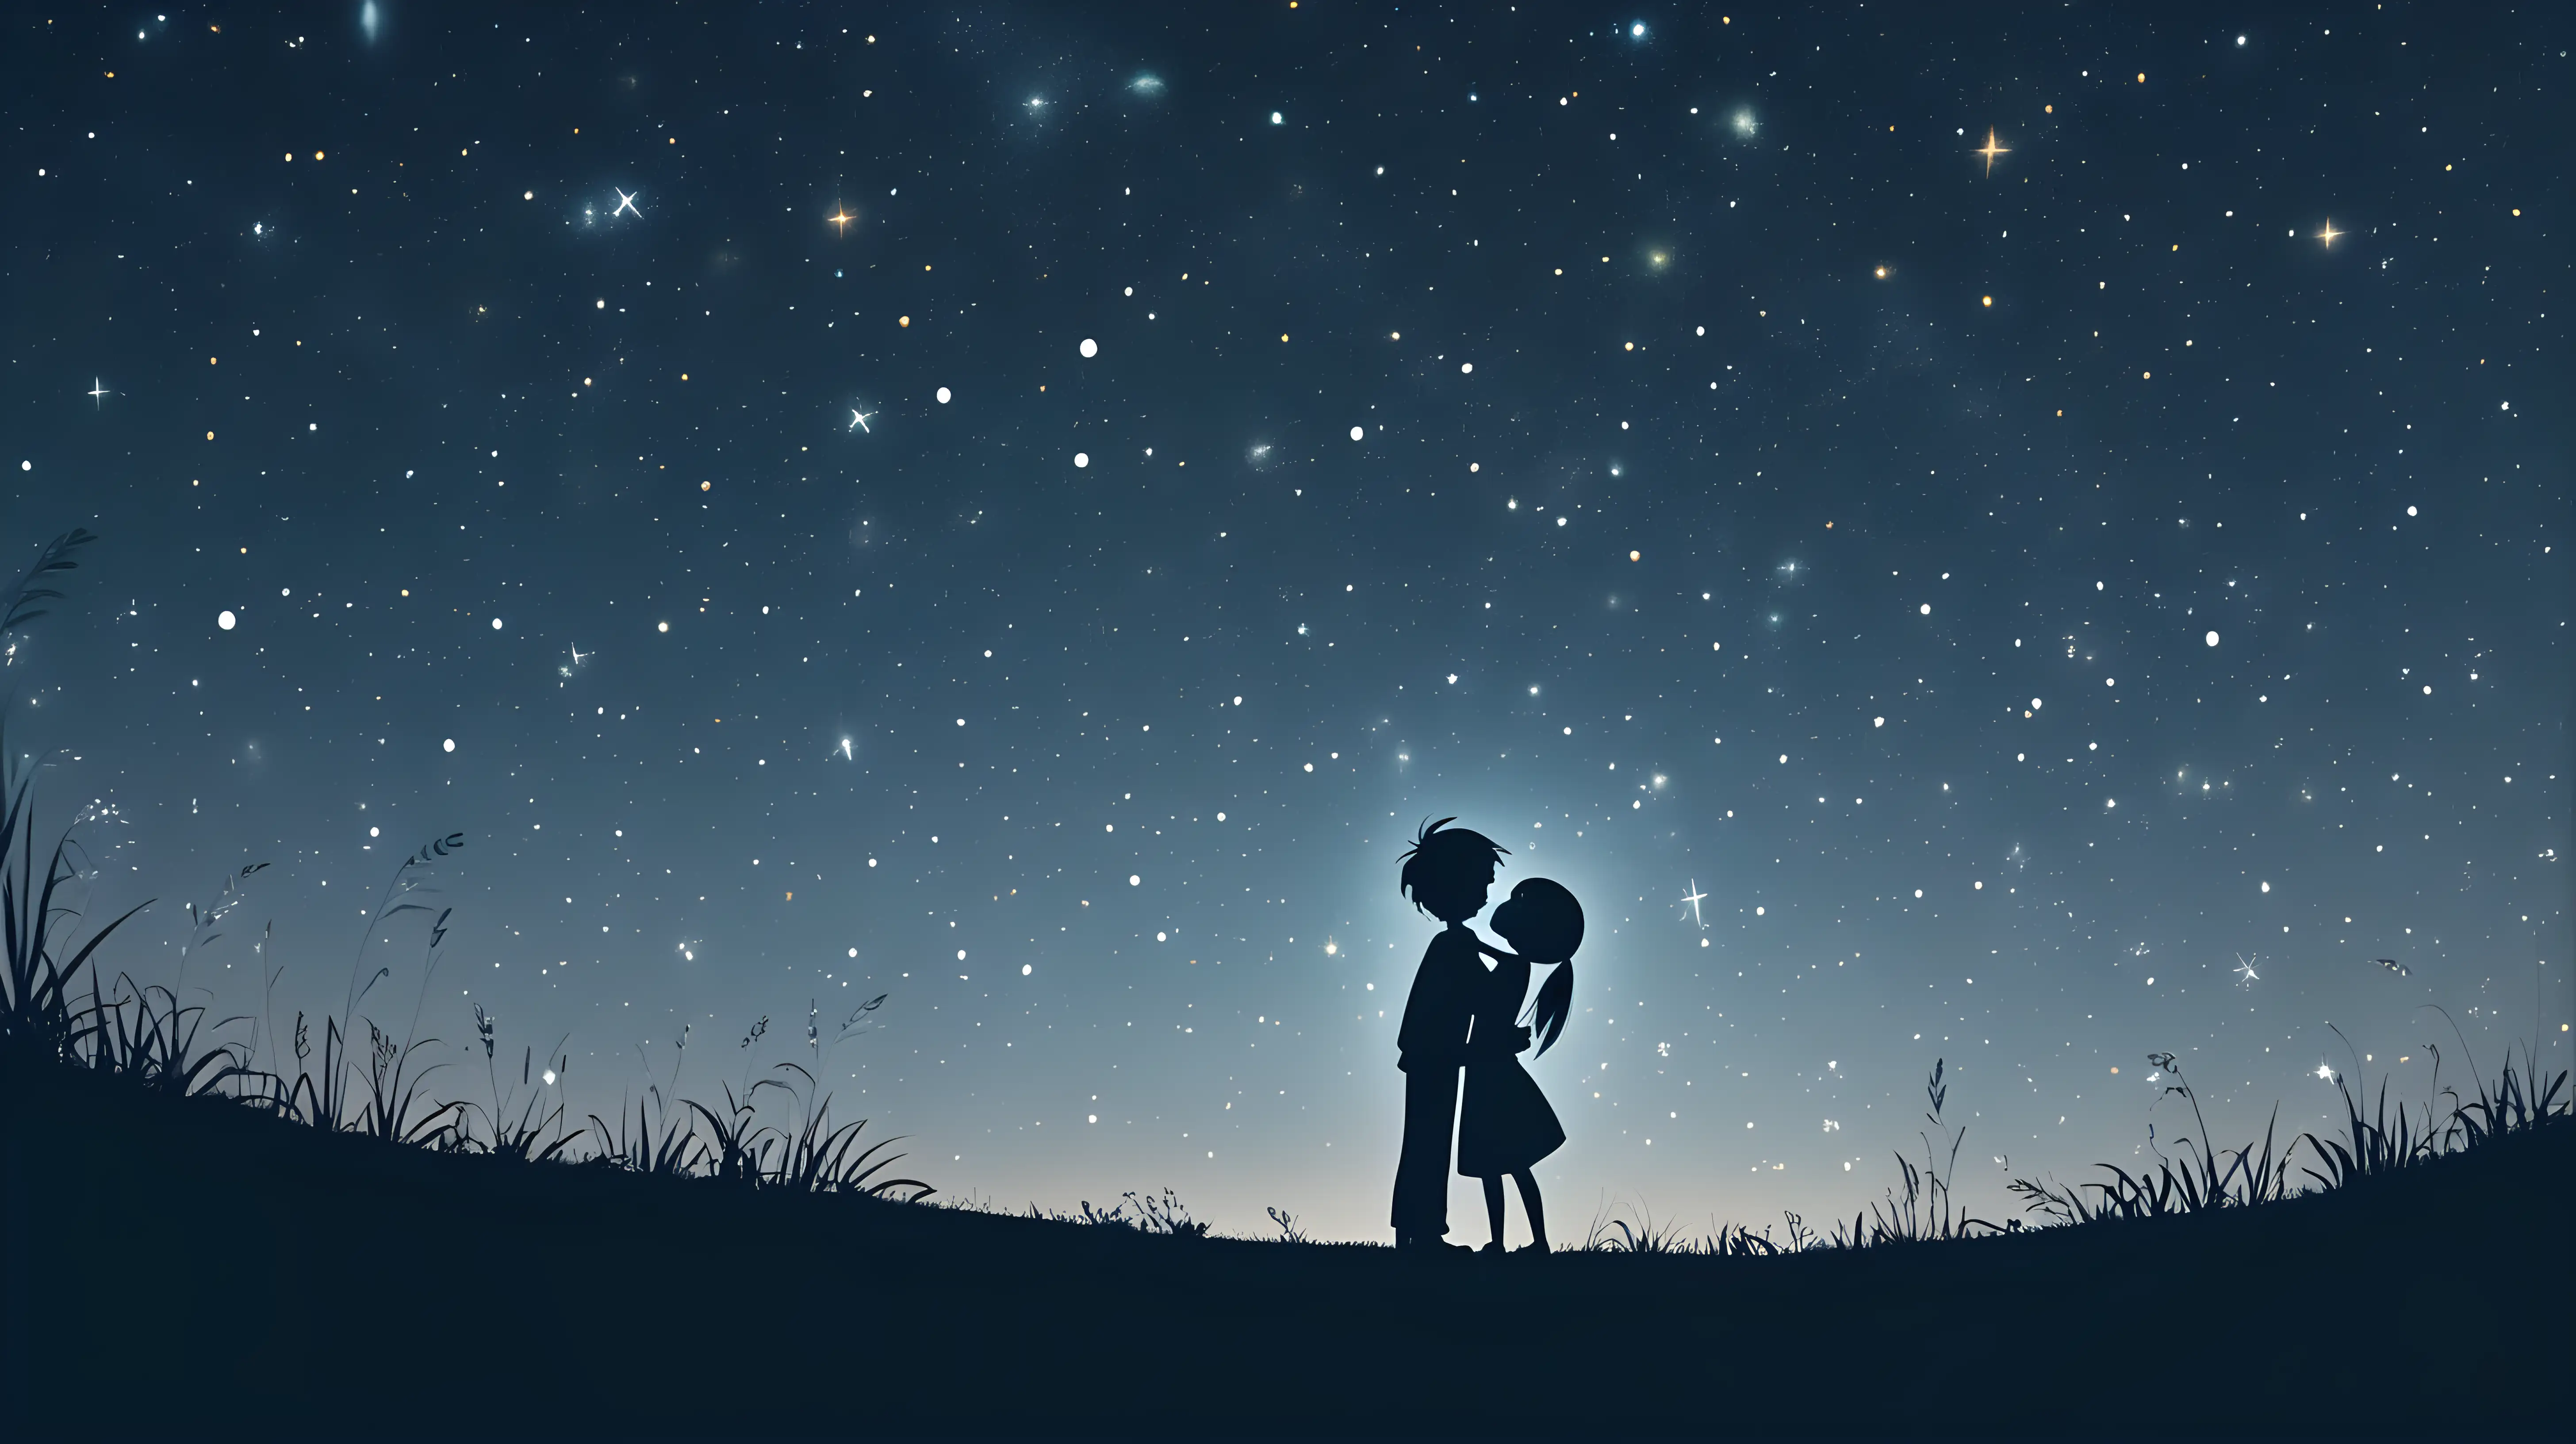 A cute and simple scene of a boy and girl sharing a hug under a starry sky, symbolizing their love.